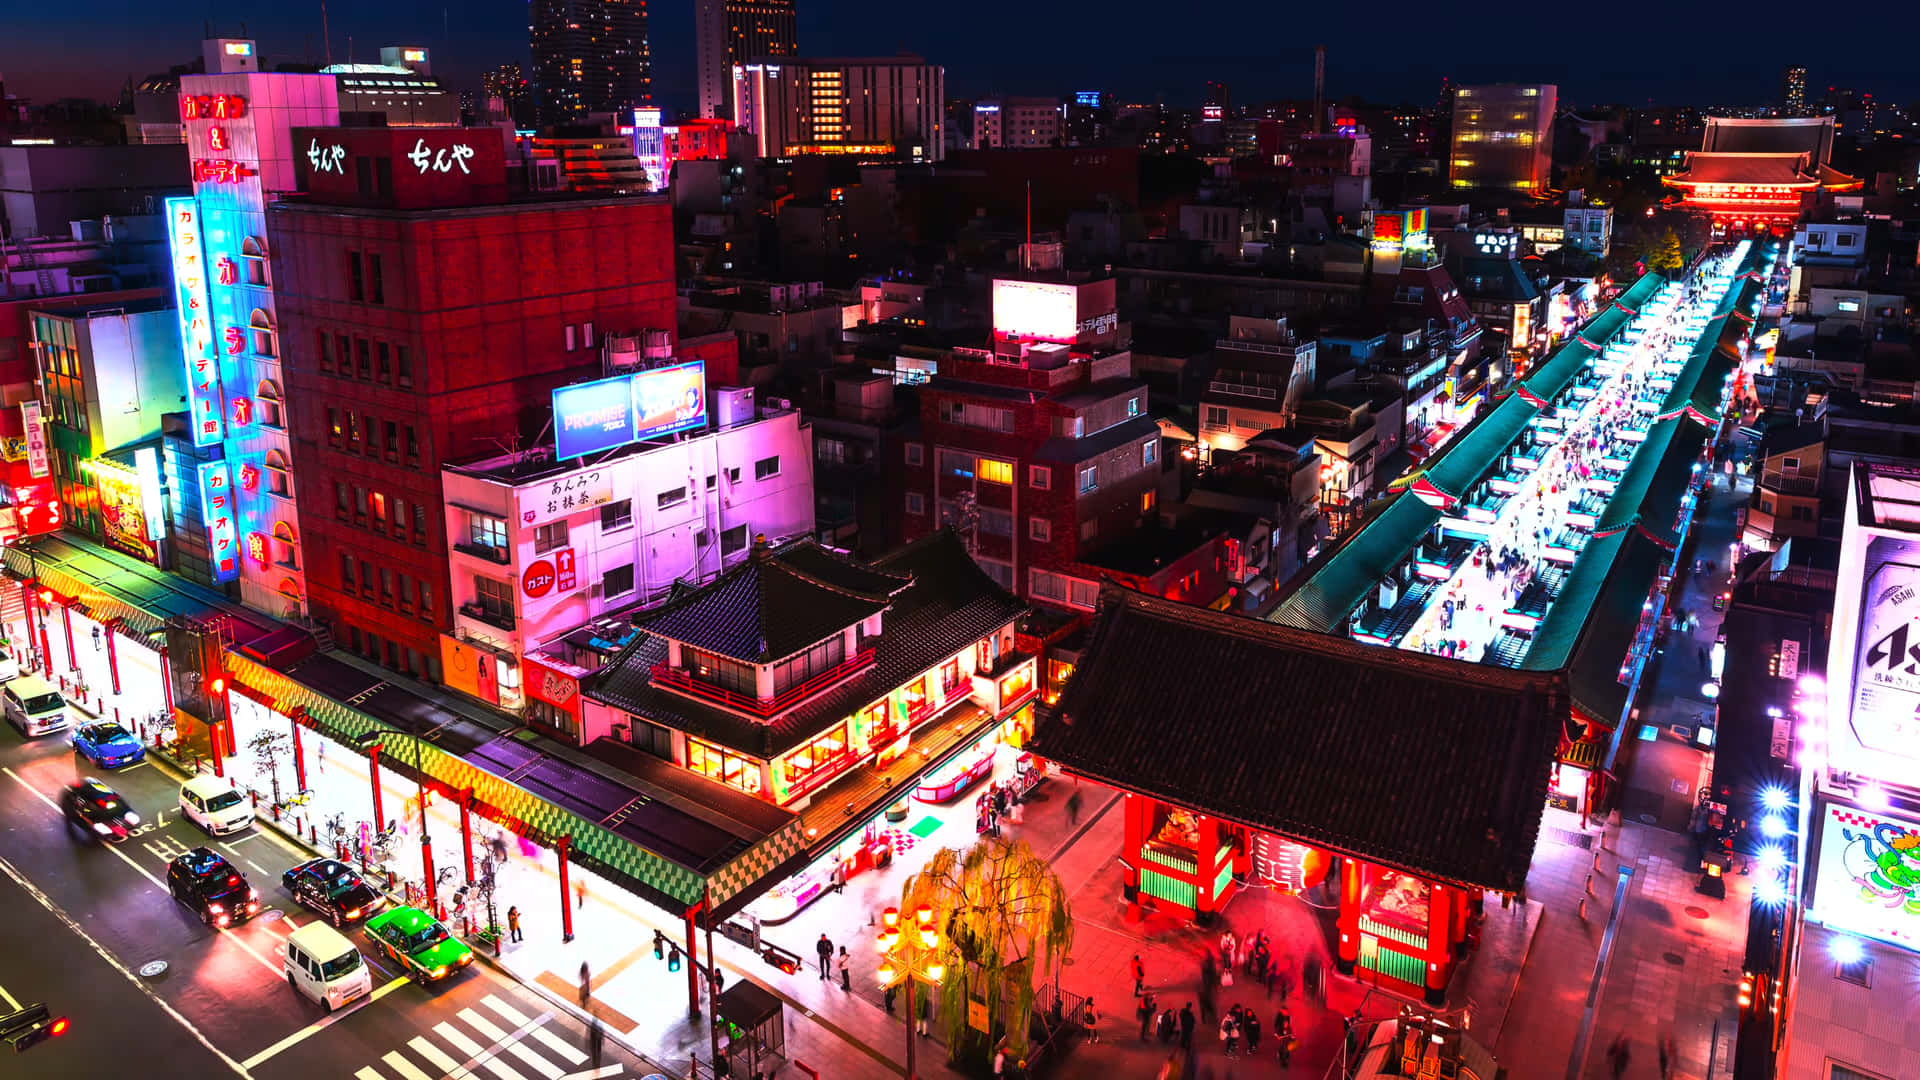 Explore the energy and experiences of Tokyo's vibrant Harajuku district. Wallpaper